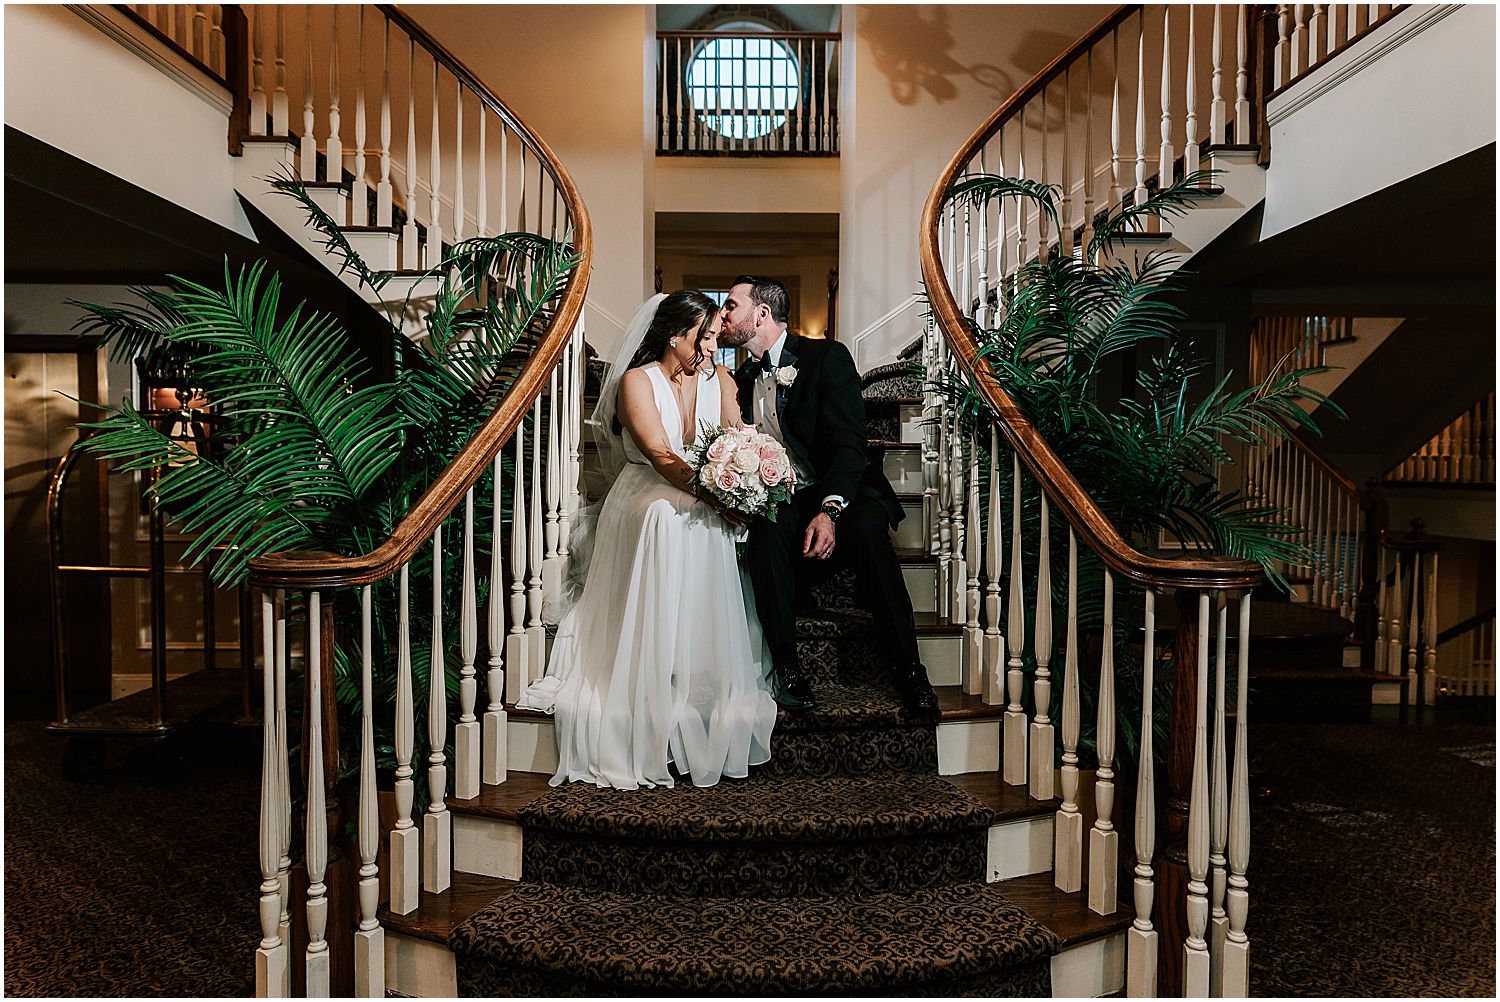 Some beautiful moments of the bride and groom at this Olde Mill Inn Wedding